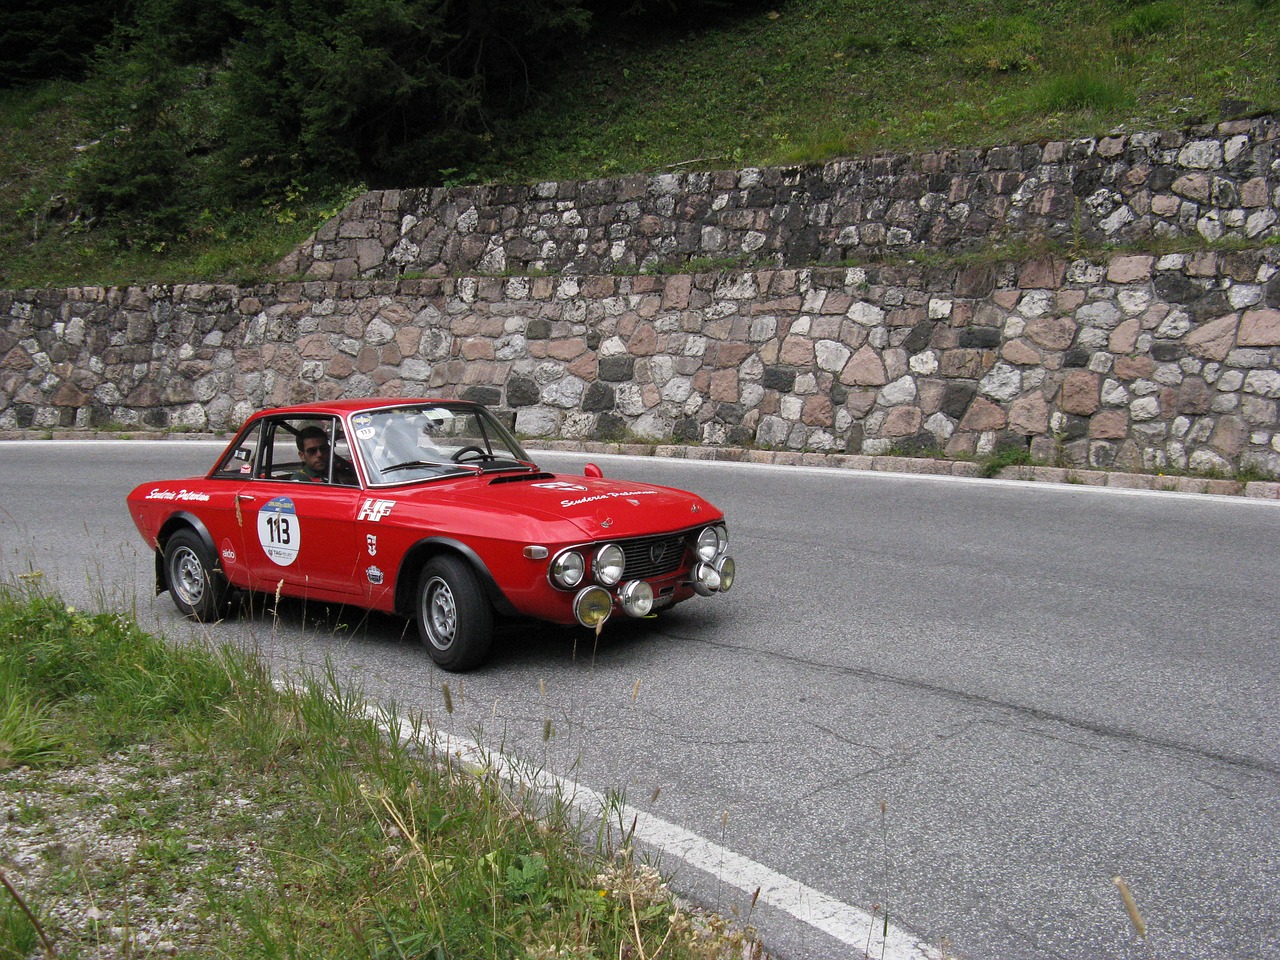 golden cup of the dolomites vintage car italian style free photo